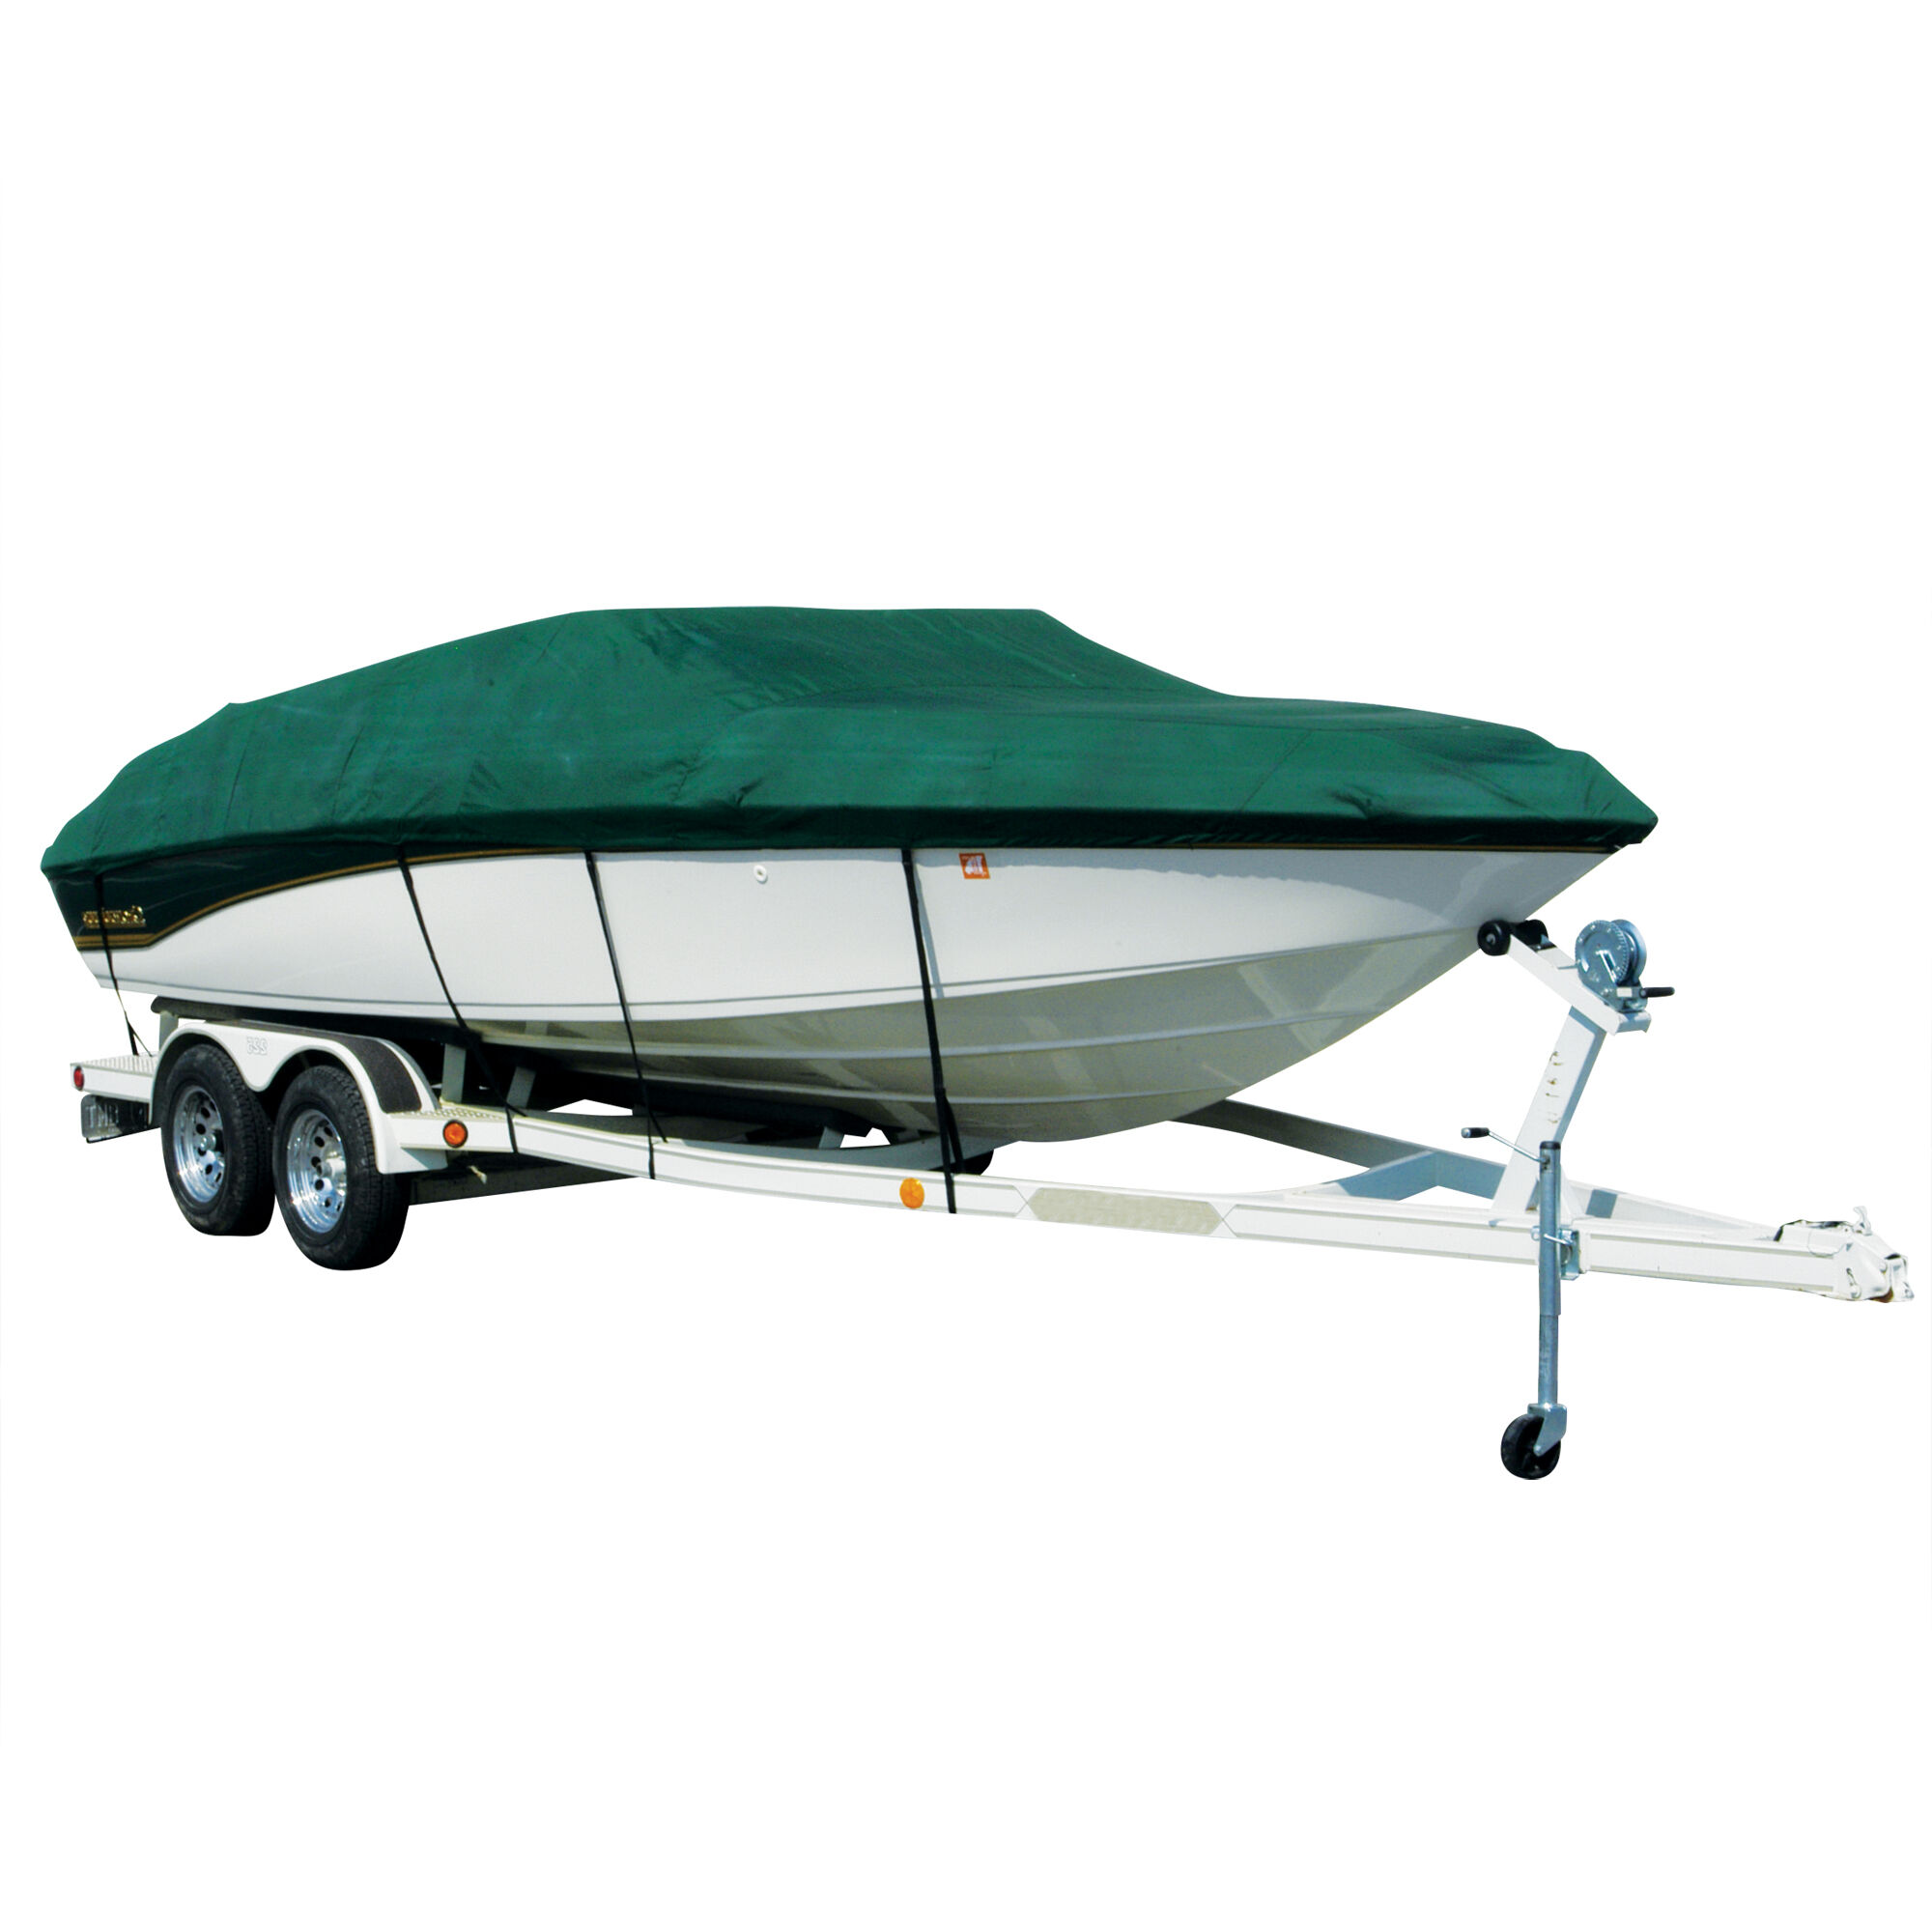 Covermate Lund 1800 PRO-V SE w/ Port Trolling Motor O/B Boat Cover in Forest Green